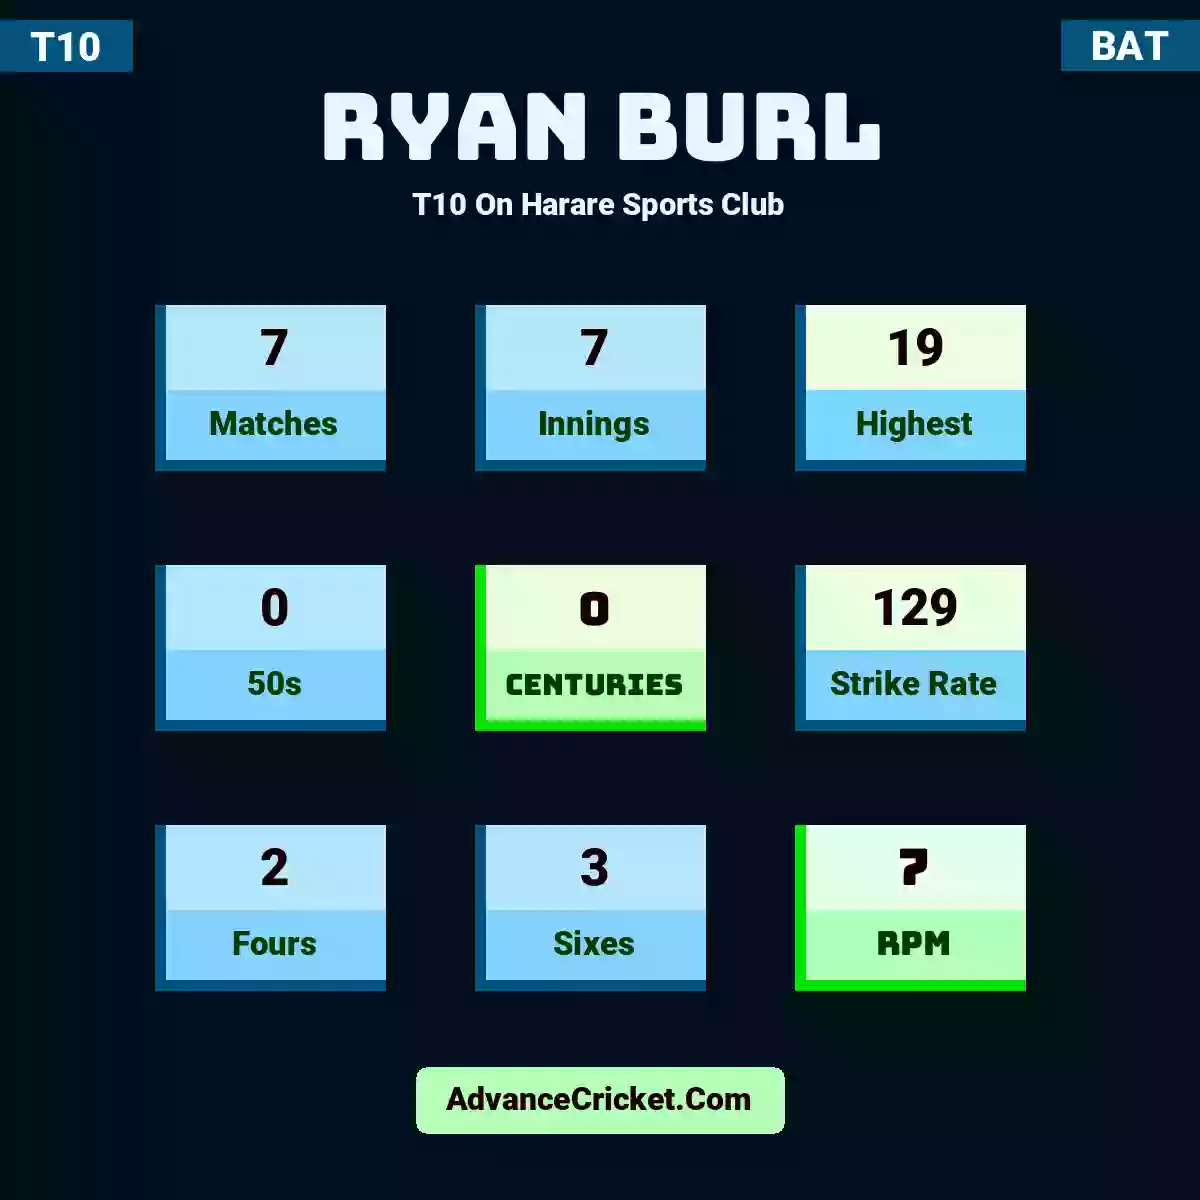 Ryan Burl T10  On Harare Sports Club, Ryan Burl played 7 matches, scored 19 runs as highest, 0 half-centuries, and 0 centuries, with a strike rate of 129. R.Burl hit 2 fours and 3 sixes, with an RPM of 7.